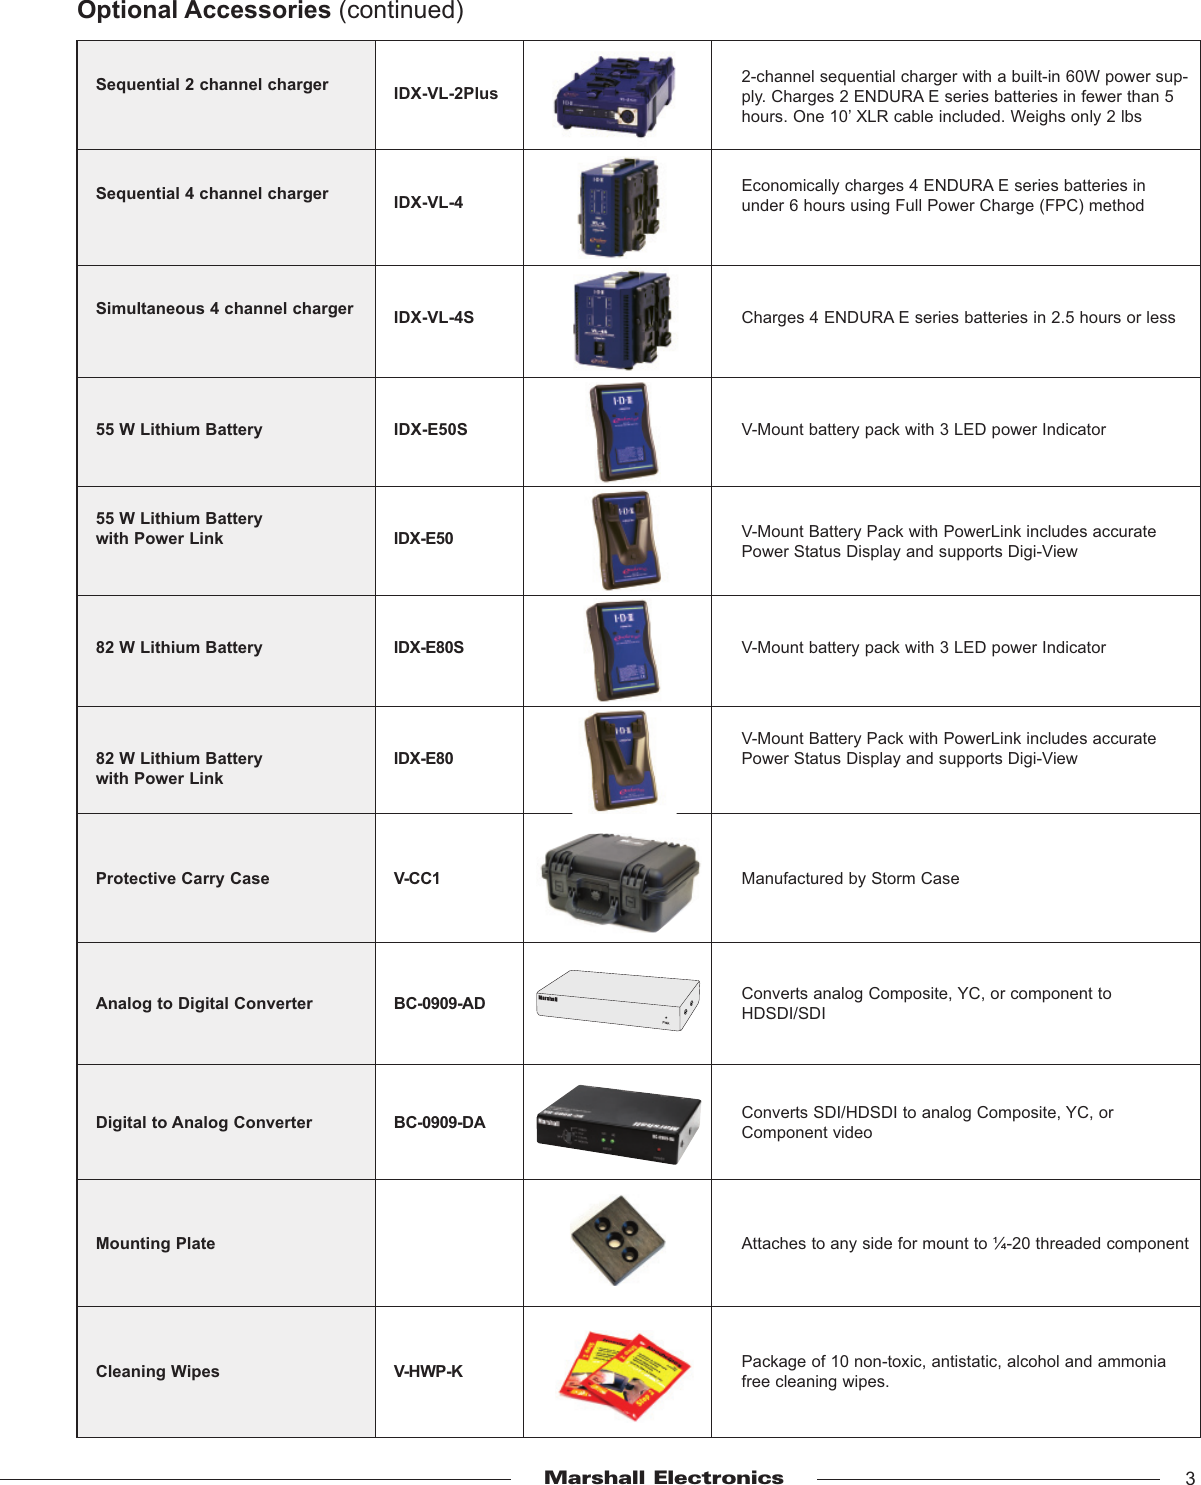 Page 4 of 6 - Marshall-Electronic Marshall-Electronic-Tft-Megapixel-Monitor-V-R70P-Sd-Users-Manual- V-R70P-SD Users Guide  Marshall-electronic-tft-megapixel-monitor-v-r70p-sd-users-manual